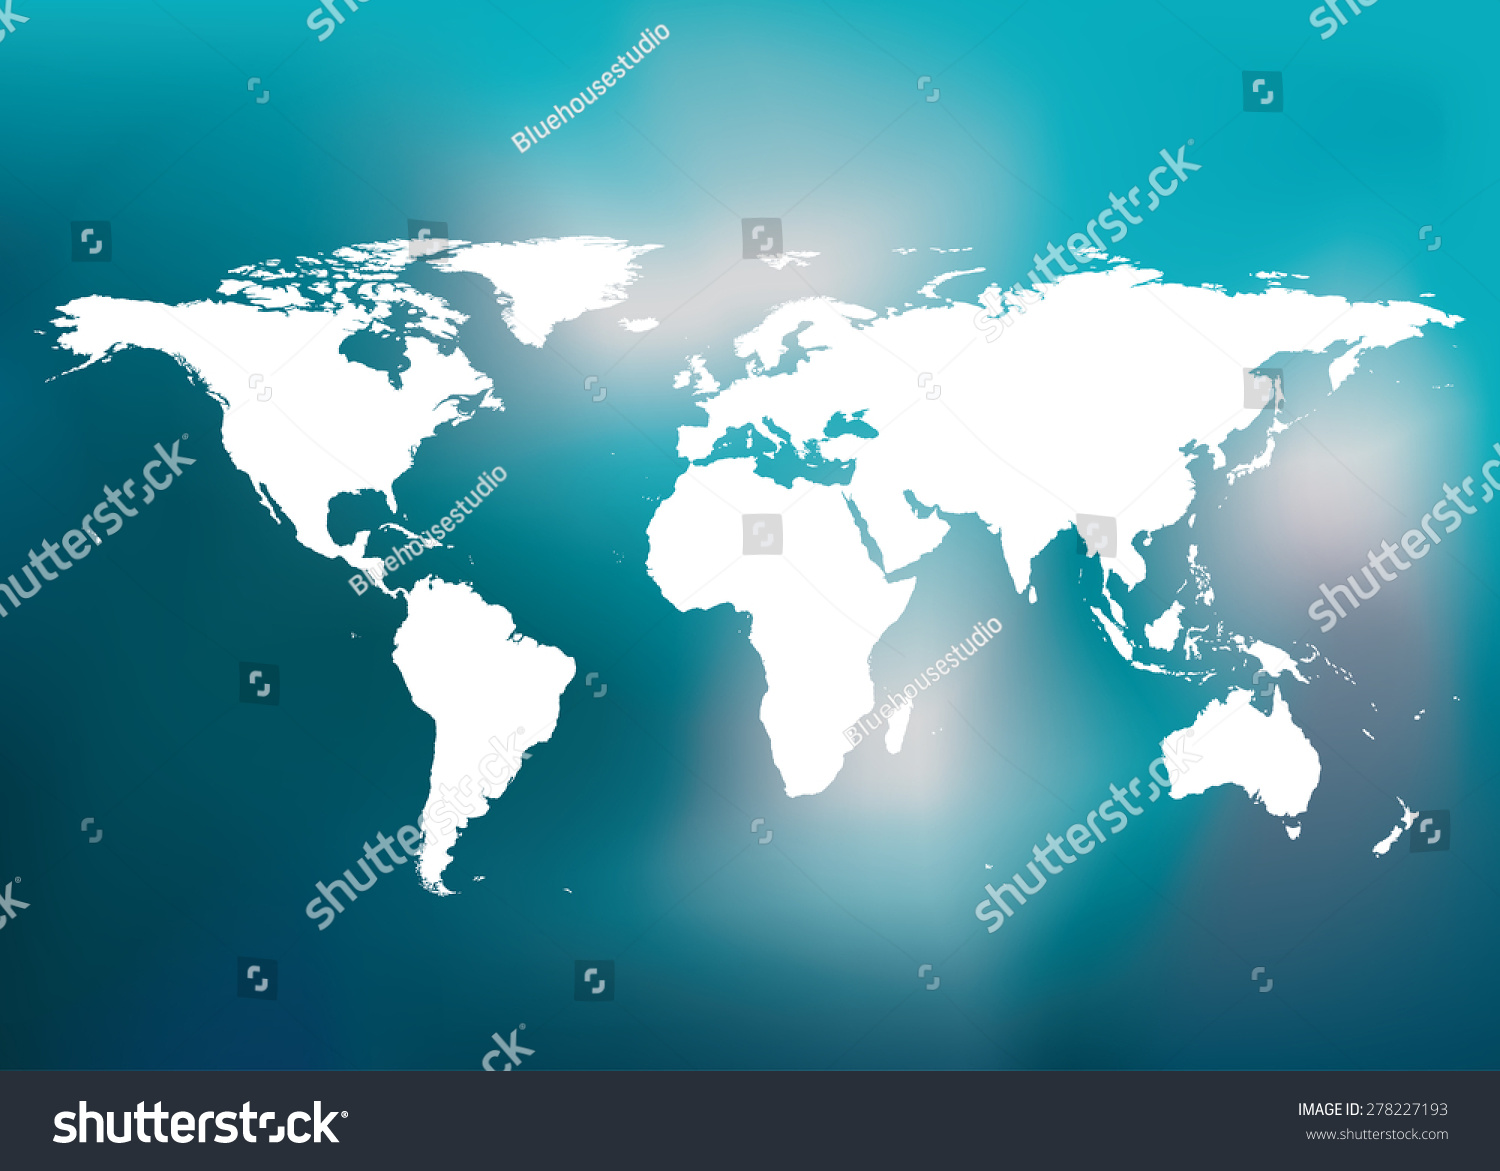 edit the world map World Map Easy Edit Adjust Color Stock Vector Royalty Free 278227193 edit the world map